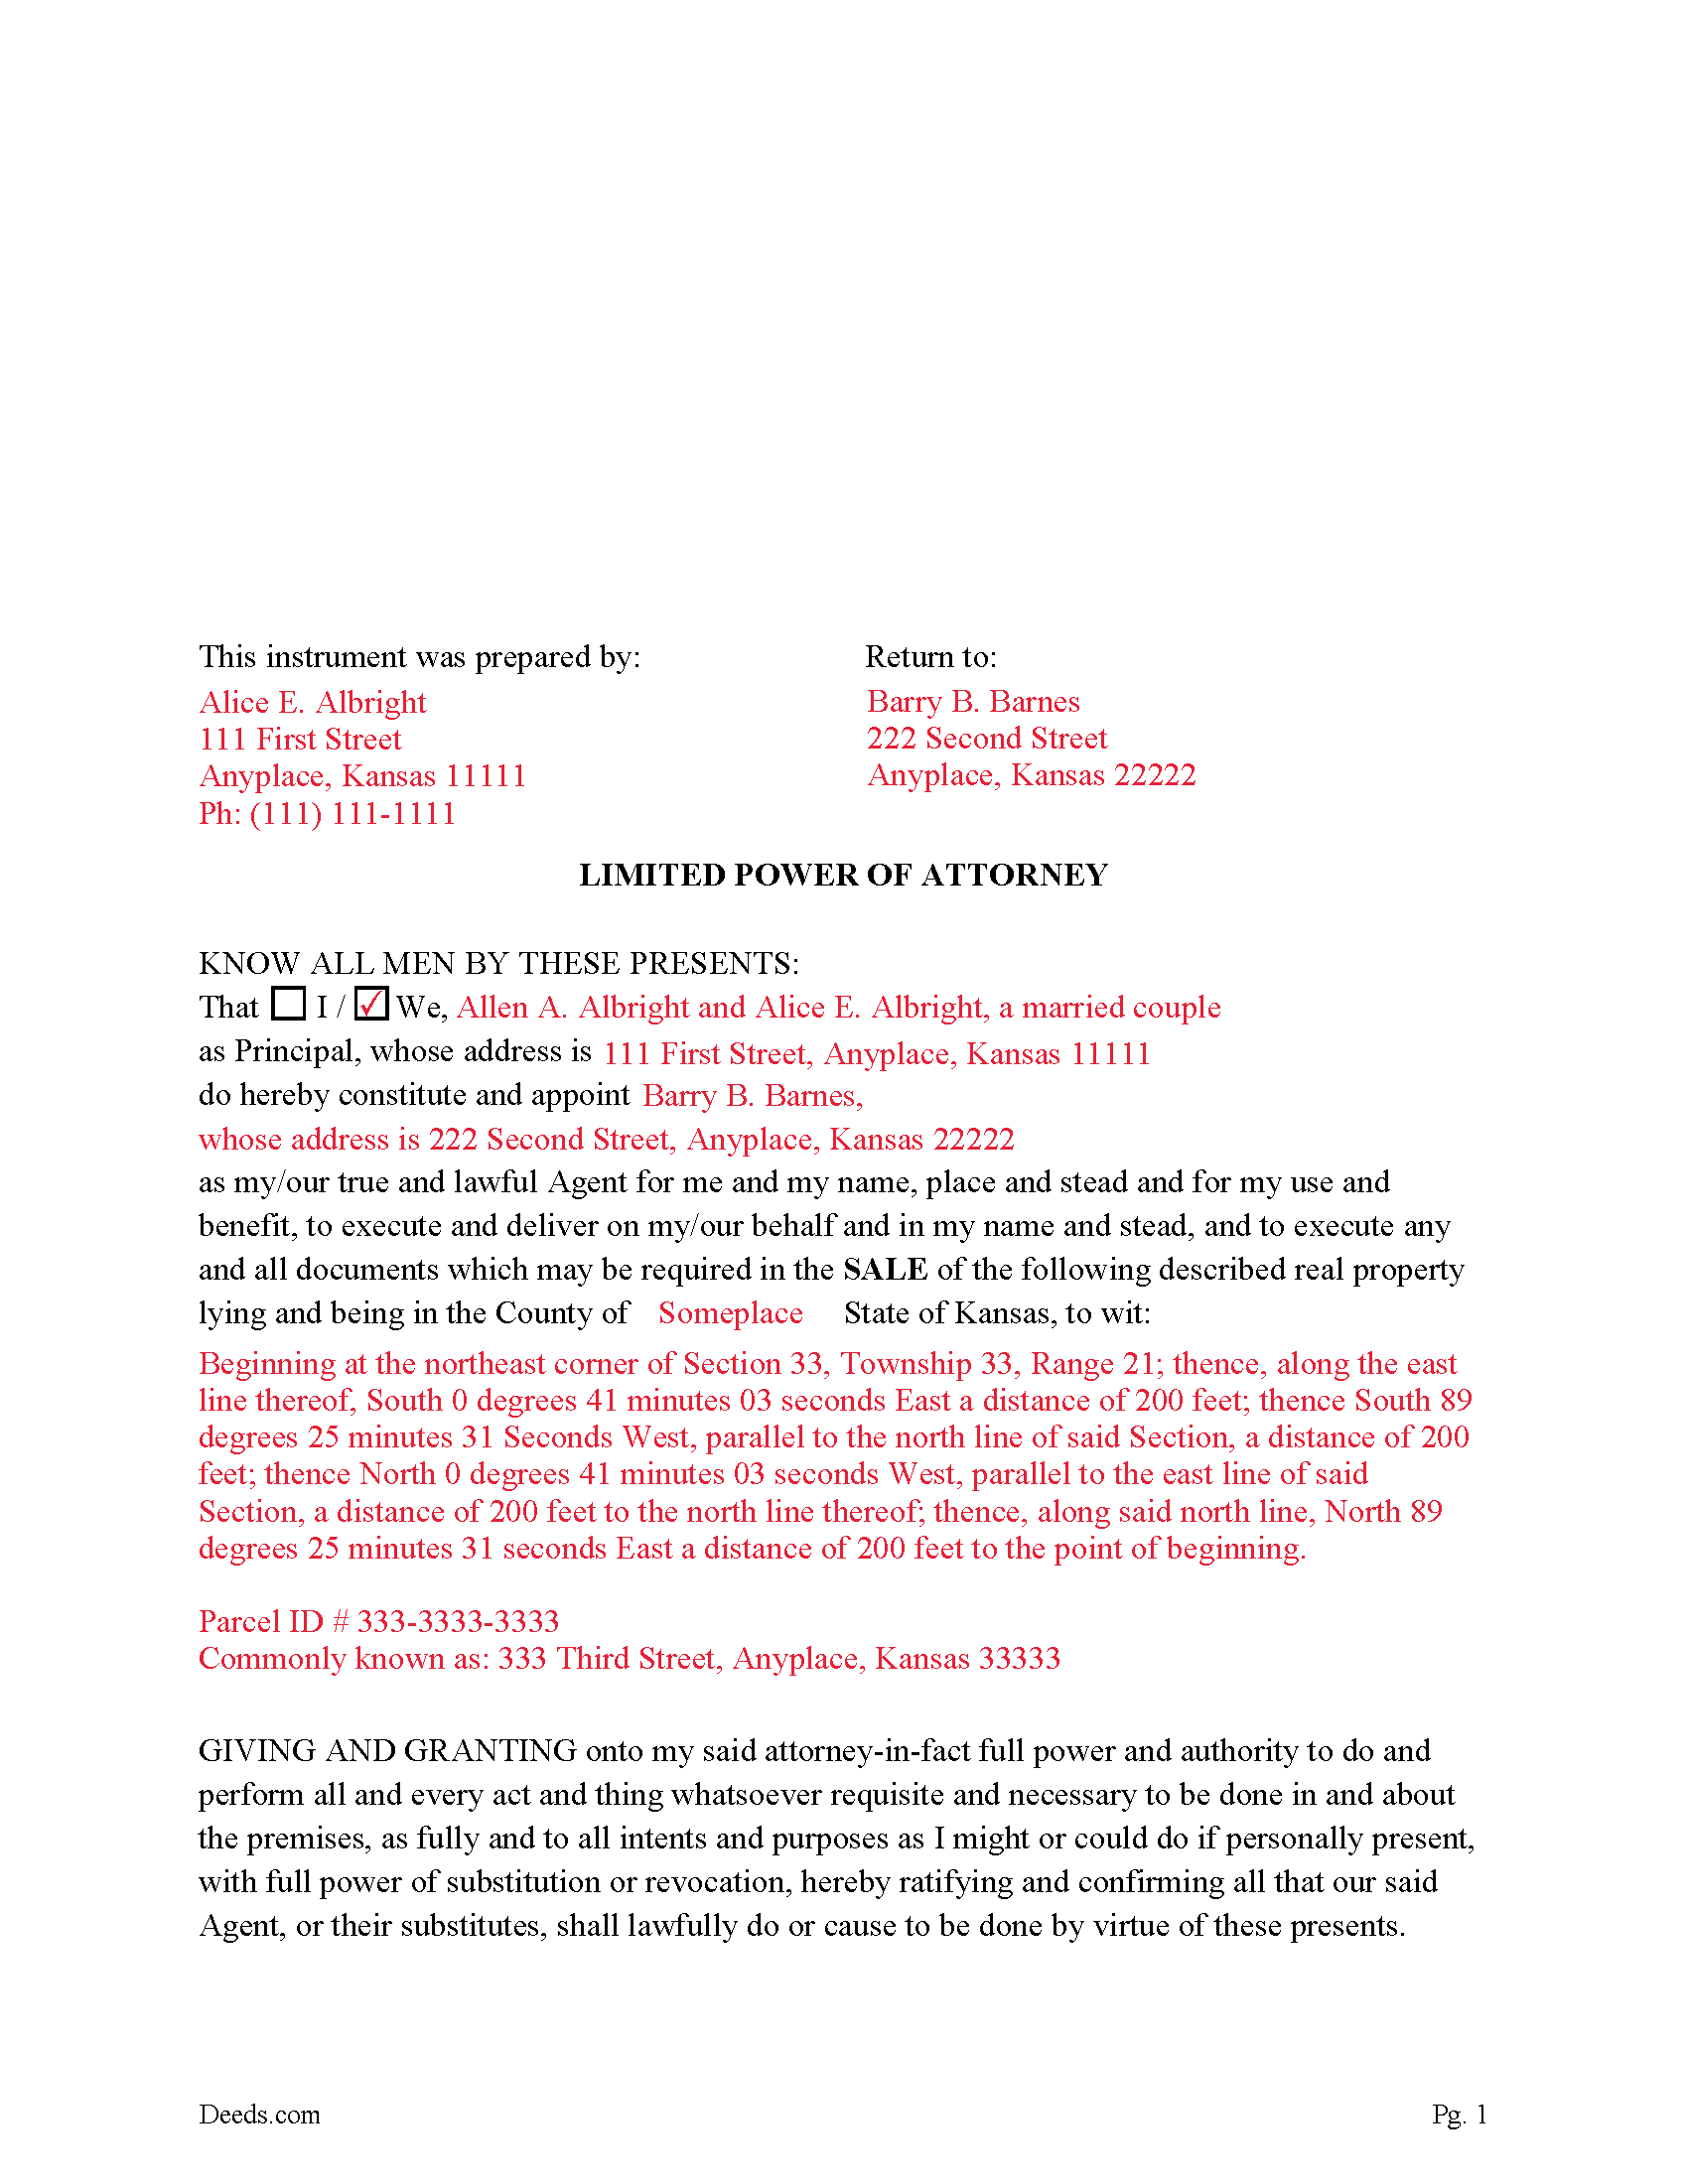 Completed Example of the Limited Power of Attorney for Sale Document